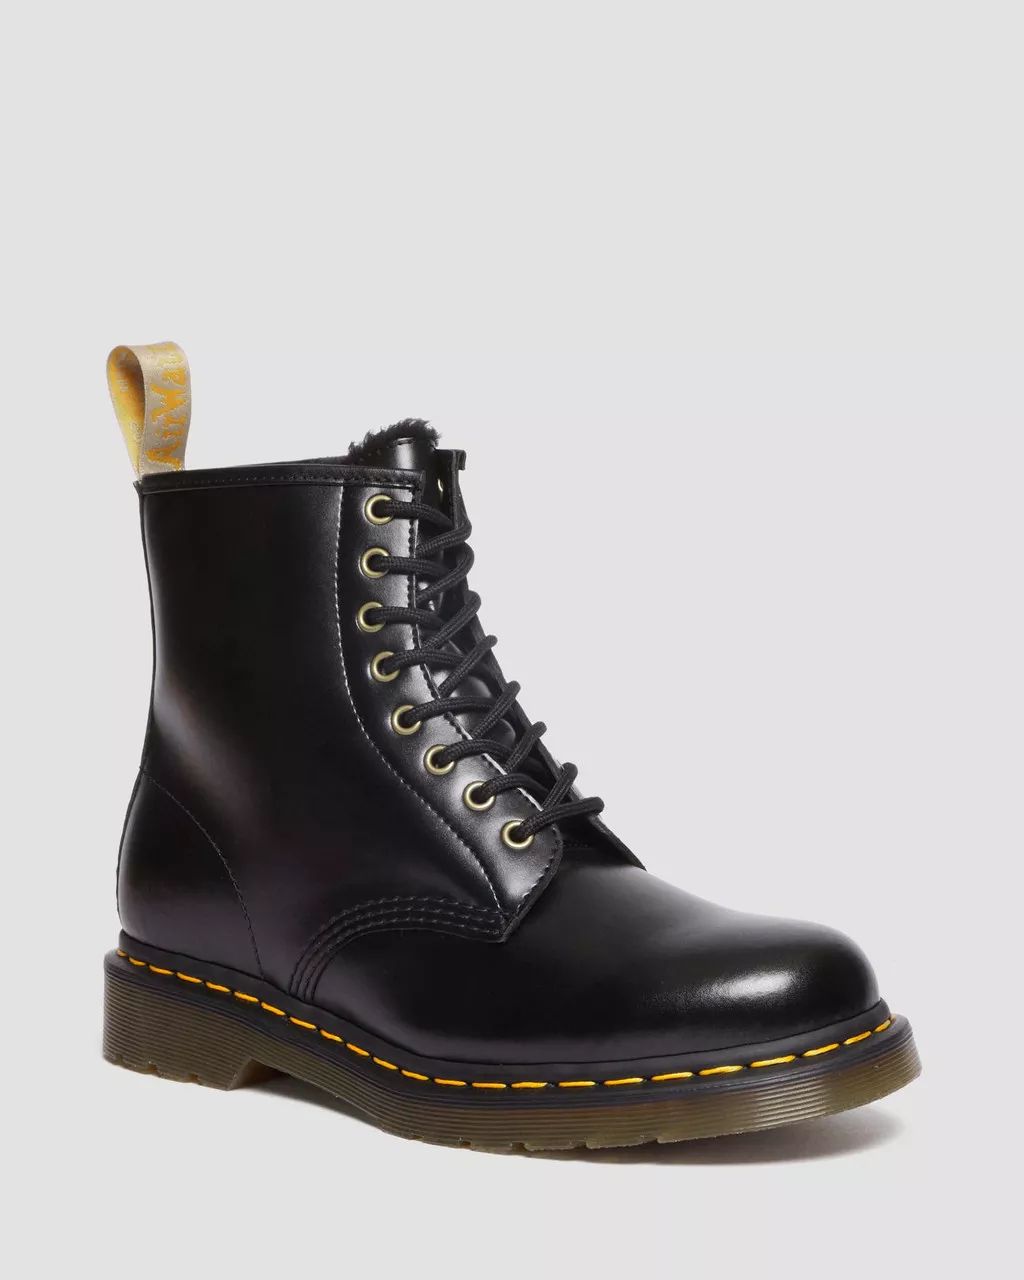 Vegan 1460 Borg Lined Lace Up Boots | Dr Martens (UK)